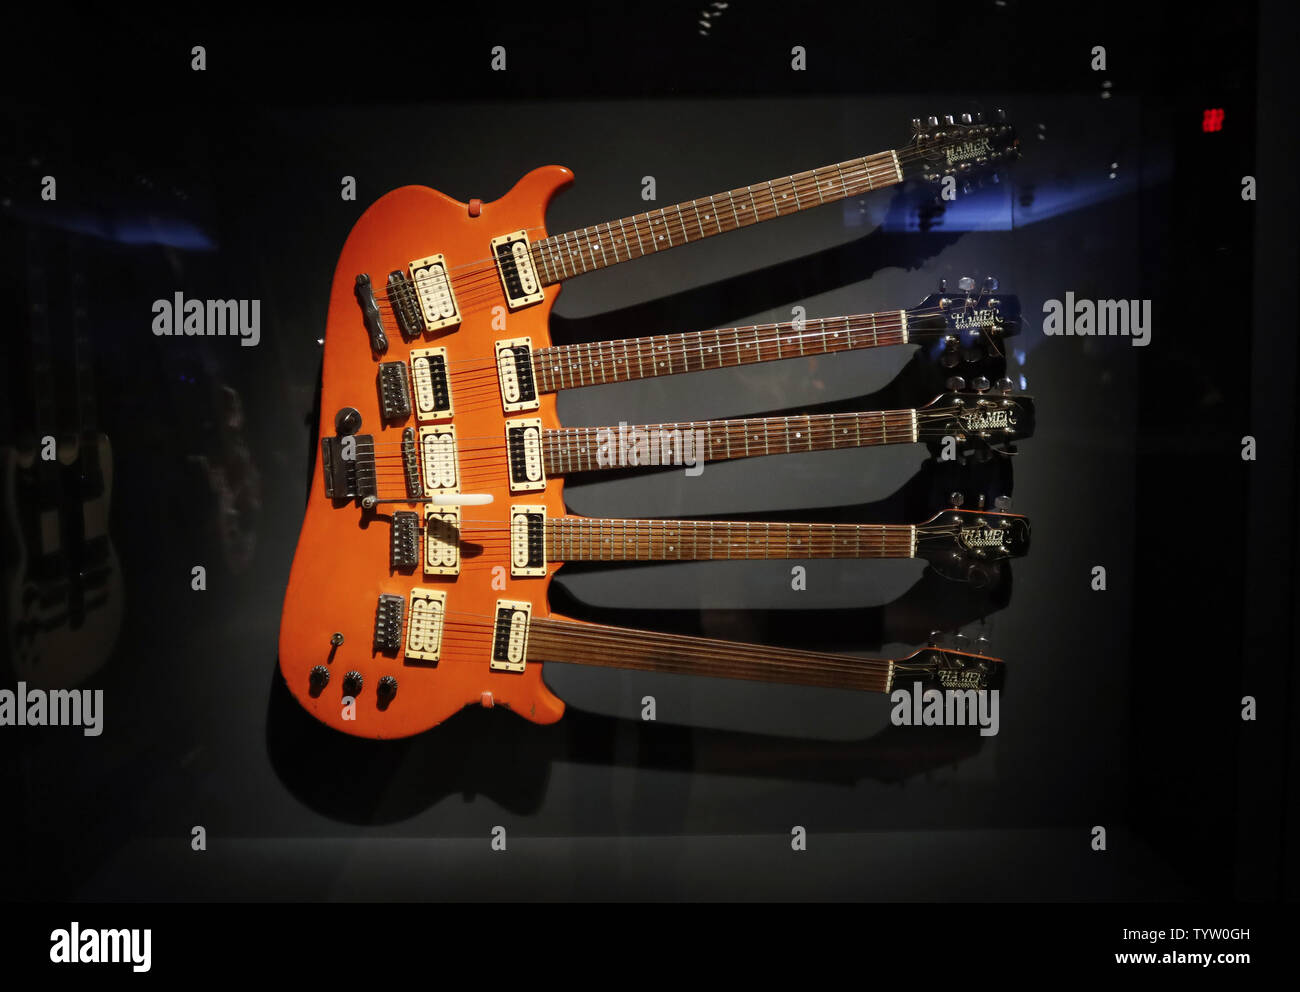 A Hamer 5 neck guitar from Cheep Trick's Rick Nielsen is on display at a press preview for Play It Loud: Instruments of Rock & Roll at Metropolitan Museum of Art on April 1, 2019 in New York City. A groundbreaking exhibition presenting a spectacular array of iconic instruments of rock and roll will go on view at The Met on April 8. The exhibition includes Chuck Berry's electric guitar ES-350T (1957), which was used to record "Johnny B. Goode"; a reconstructed performance rig from Eddie Van Halen as it appeared onstage in 1978; Lady Gaga's custom-designed piano; Stevie Ray Vaughan's composite s Stock Photo